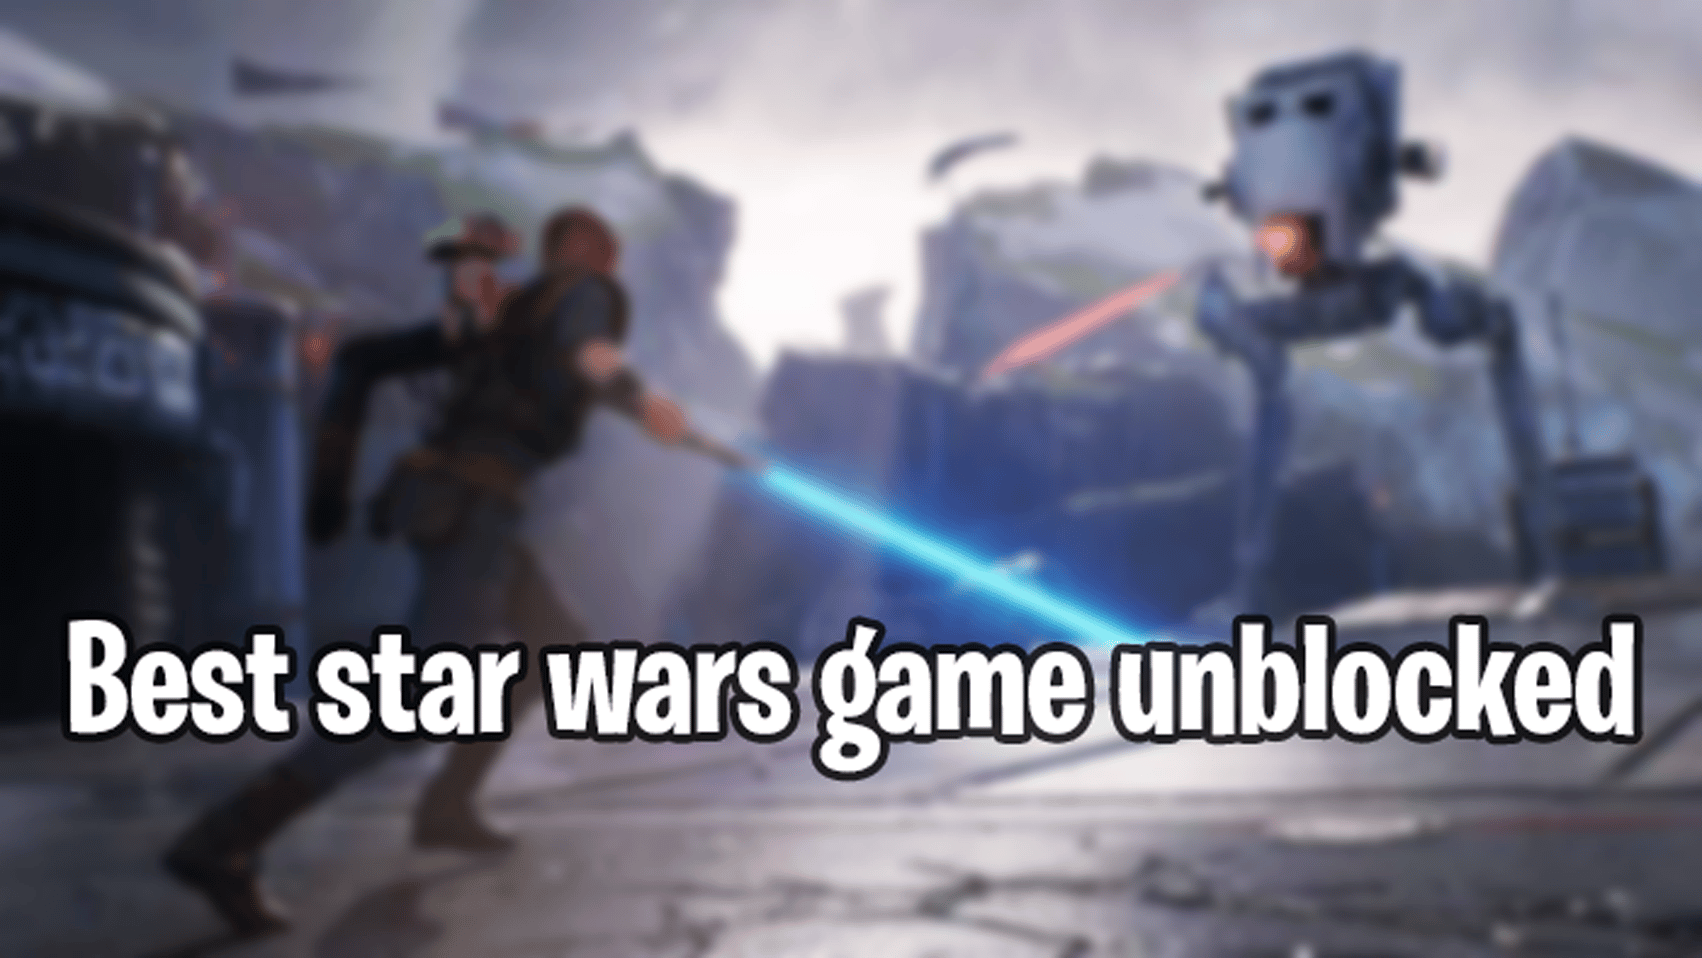 The best Star Wars games on PC1